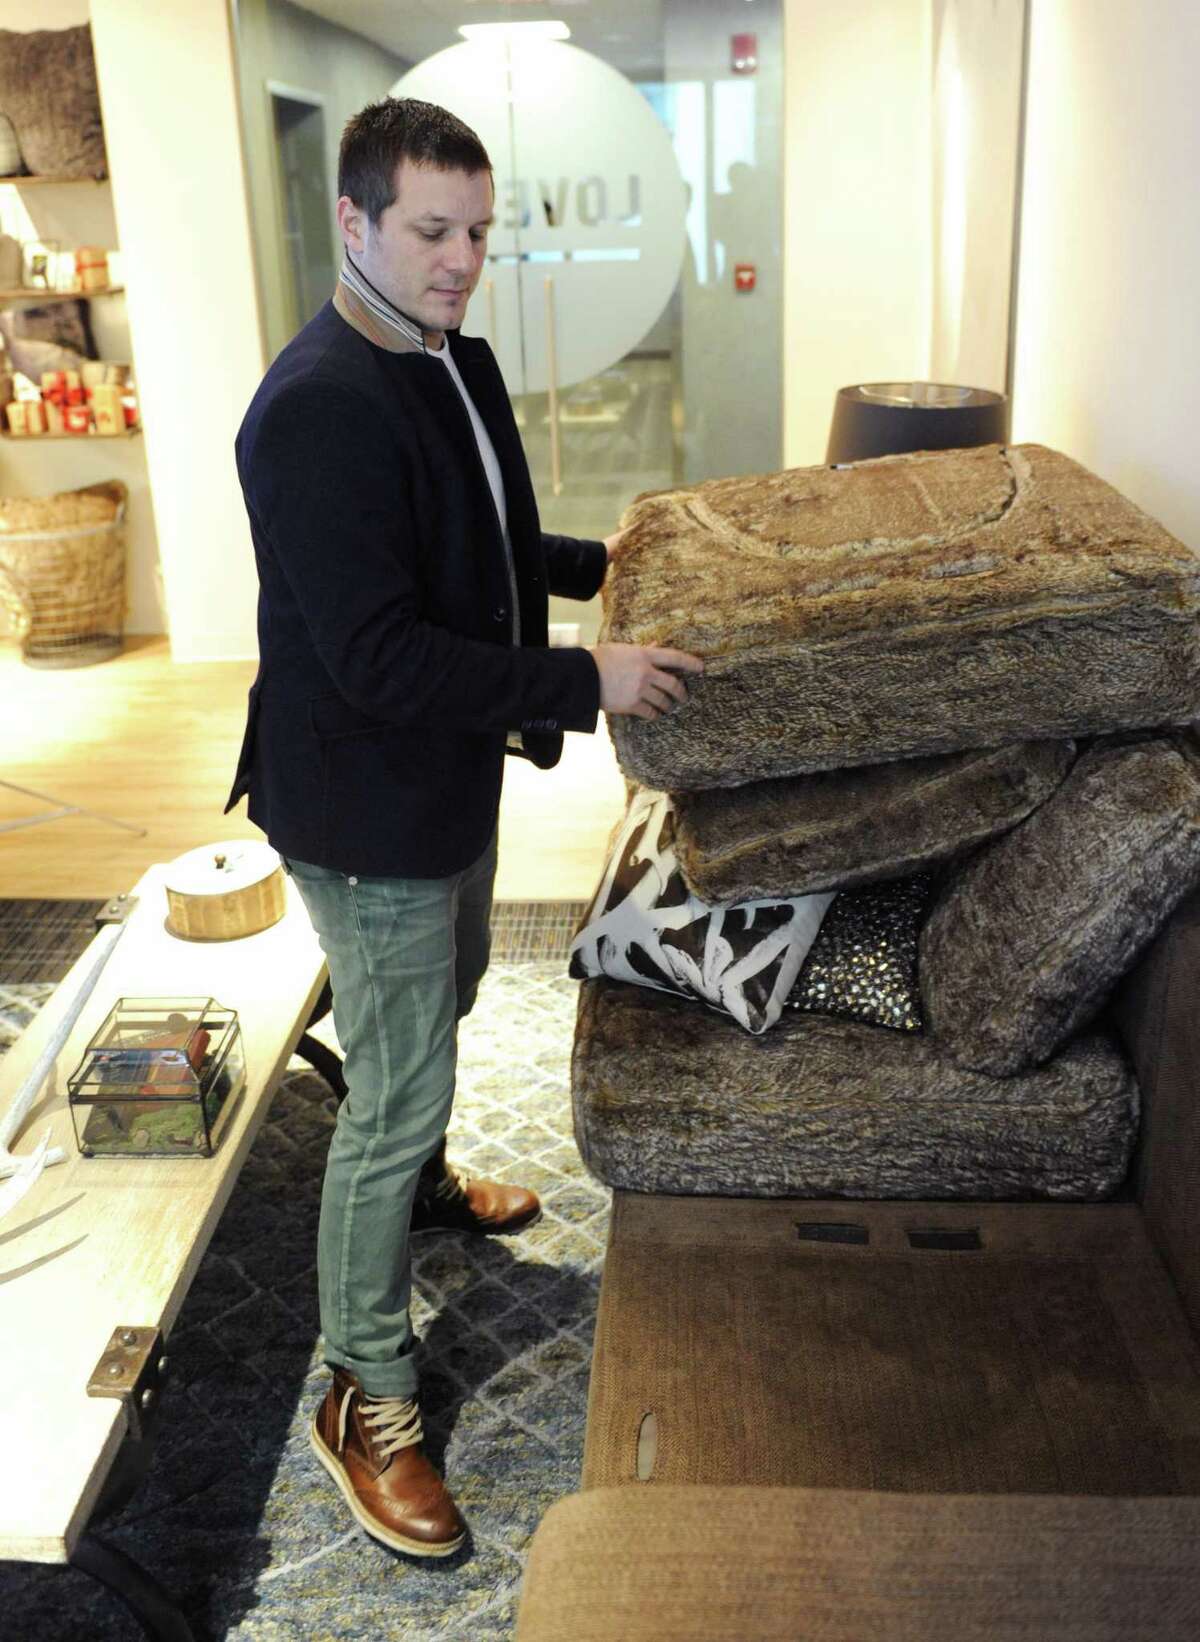 Shawn Nelson is founder and CEO of Stamford-based furniture retailer Lovesac Co.